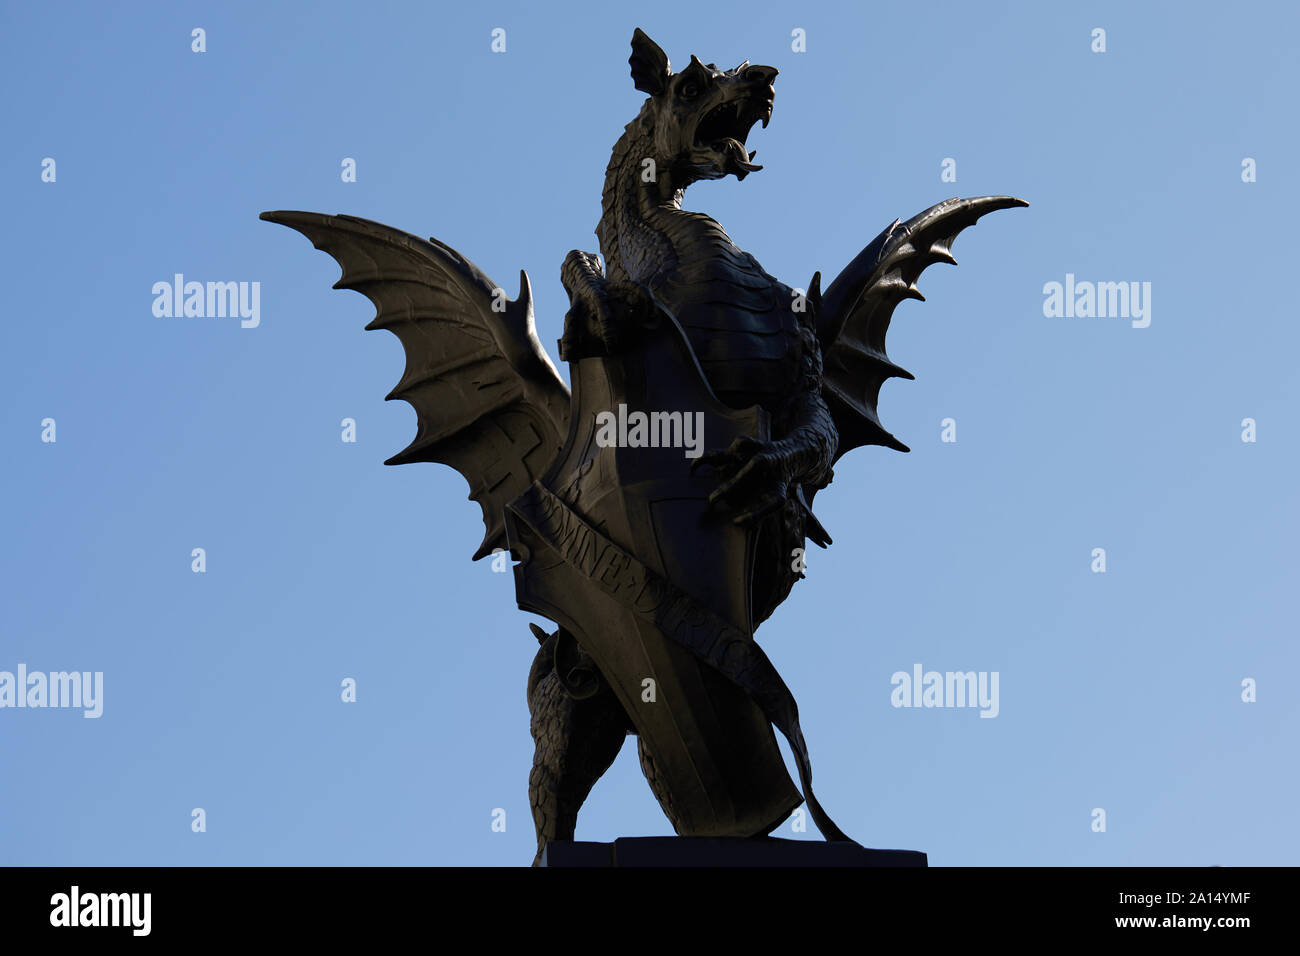 London, U.K. - Sept 17, 2019: Sculpture by Charles Bell Birch of a dragon that sits atop the Temple Bar Memorial in the Strand. It marks the ancient e Stock Photo